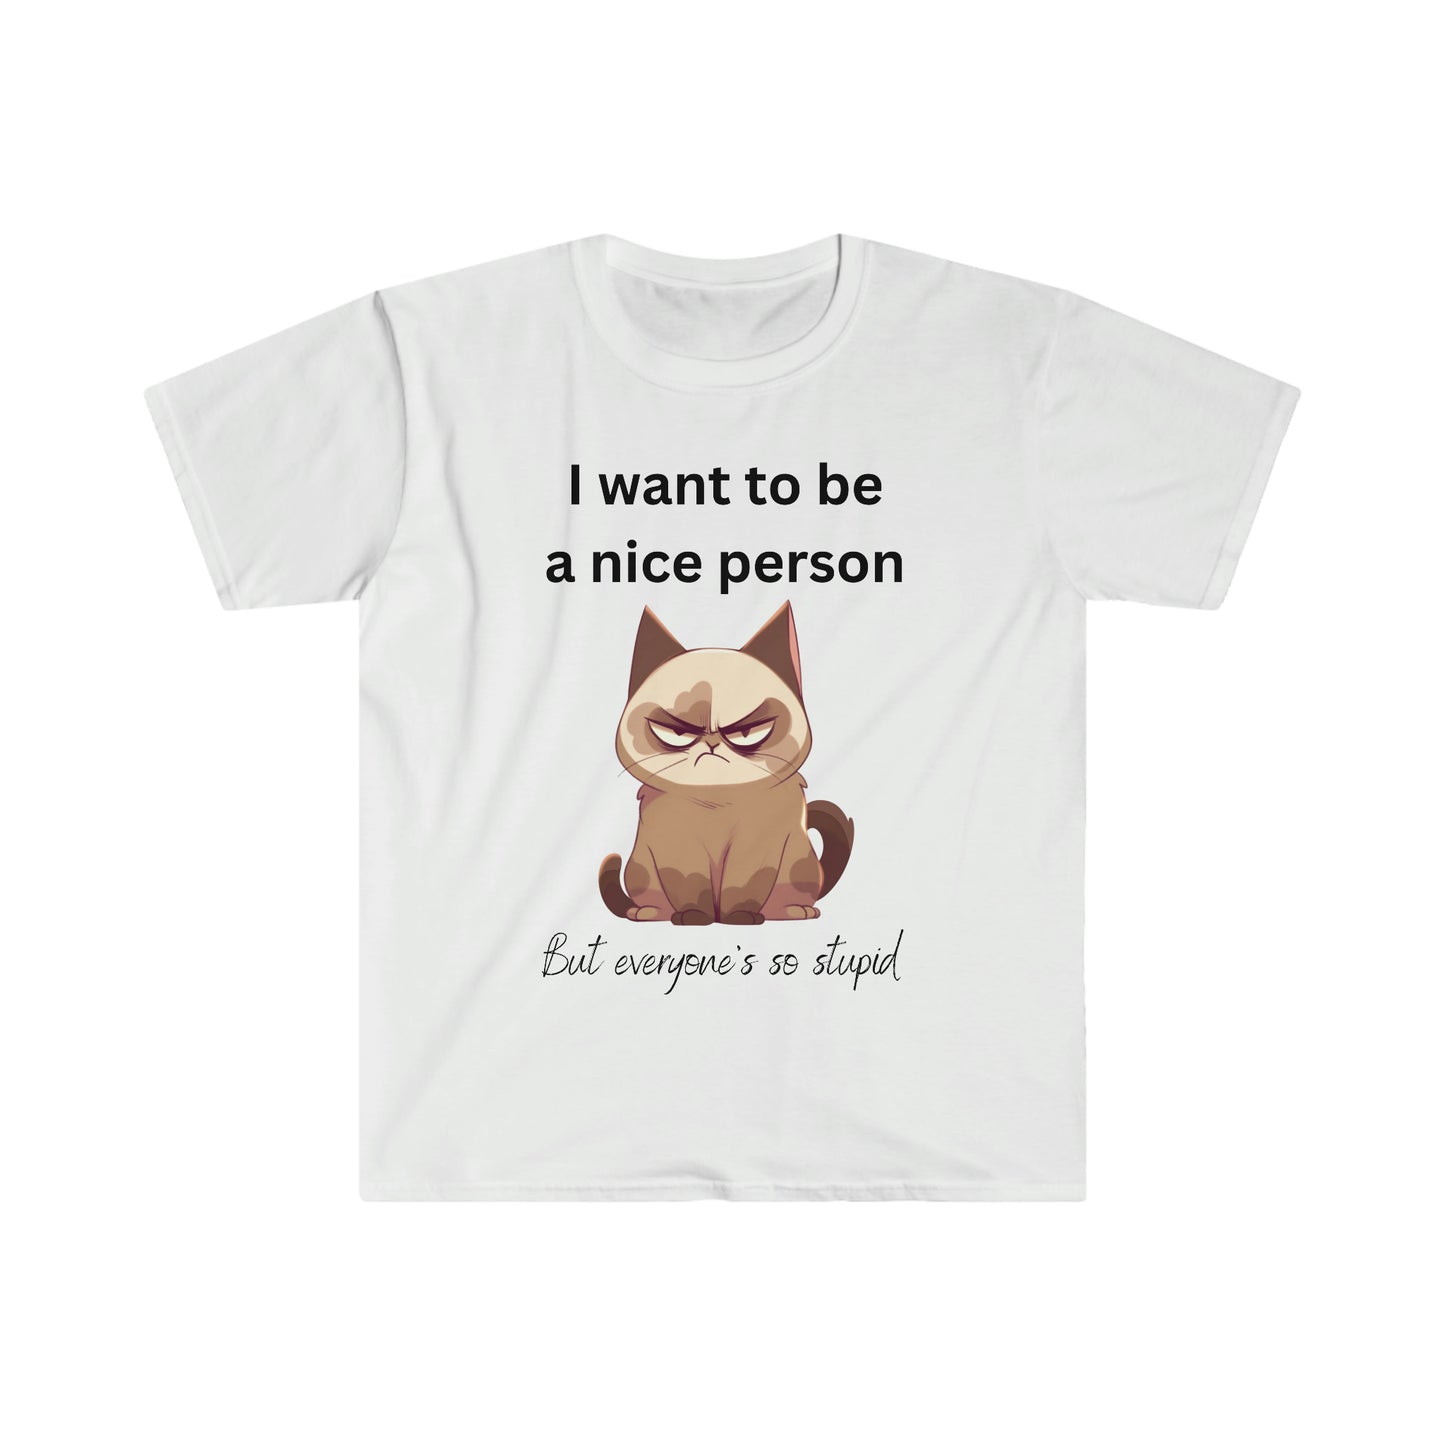 Grouchy Cat Shirt: I Want to Be Nice, But Everyone's So Stupid" - Funny Cat Lover Tee, Sarcastic T-Shirt, Grouchy Cat Quote